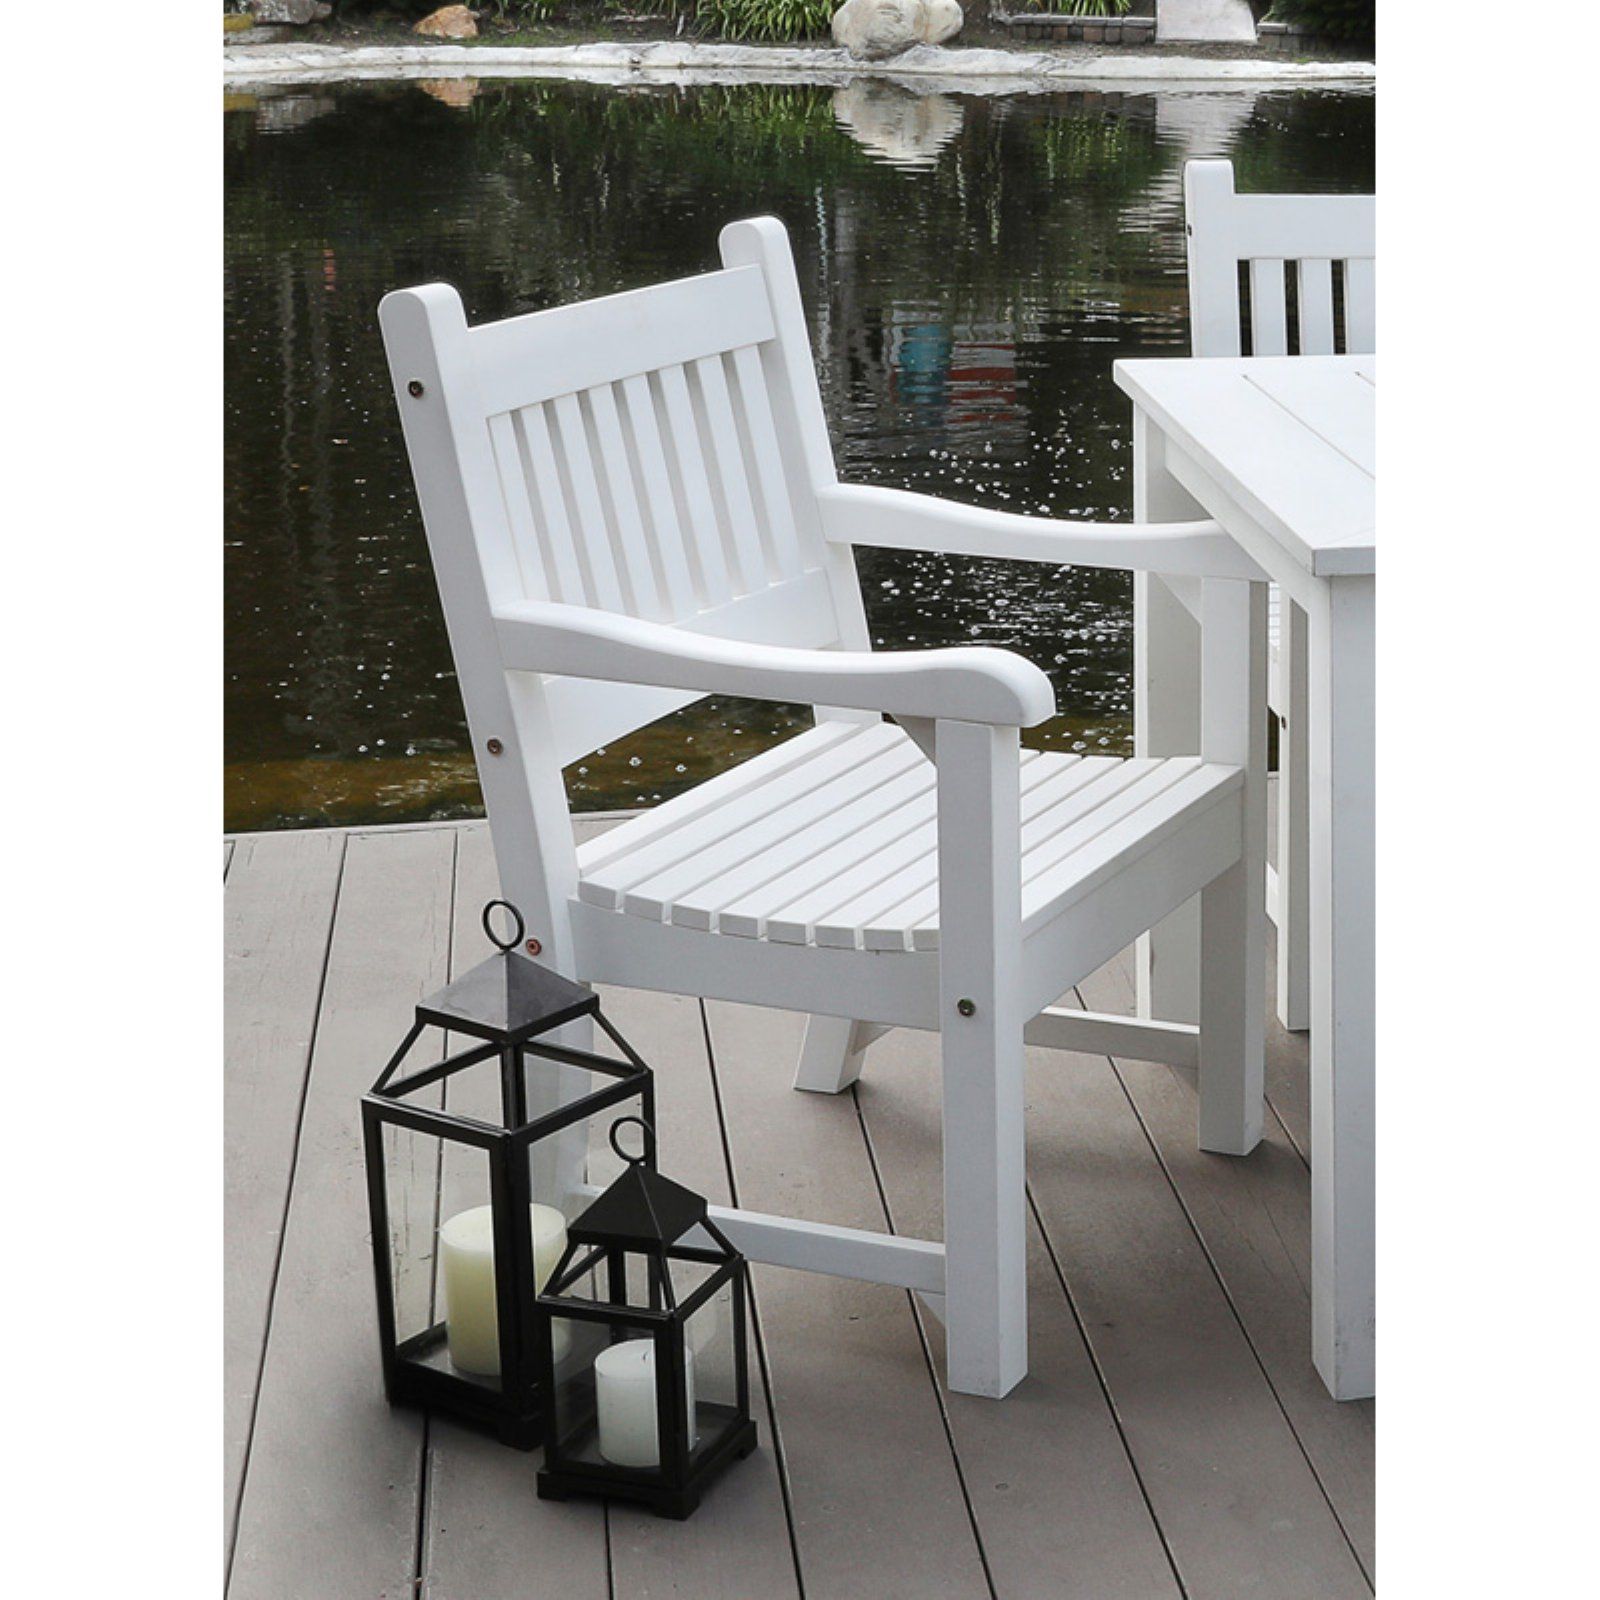 Shine Company Sunrise Outdoor Plastic Dining Chair – White – Walmart Inside White Fabric Outdoor Patio Sets (View 12 of 15)